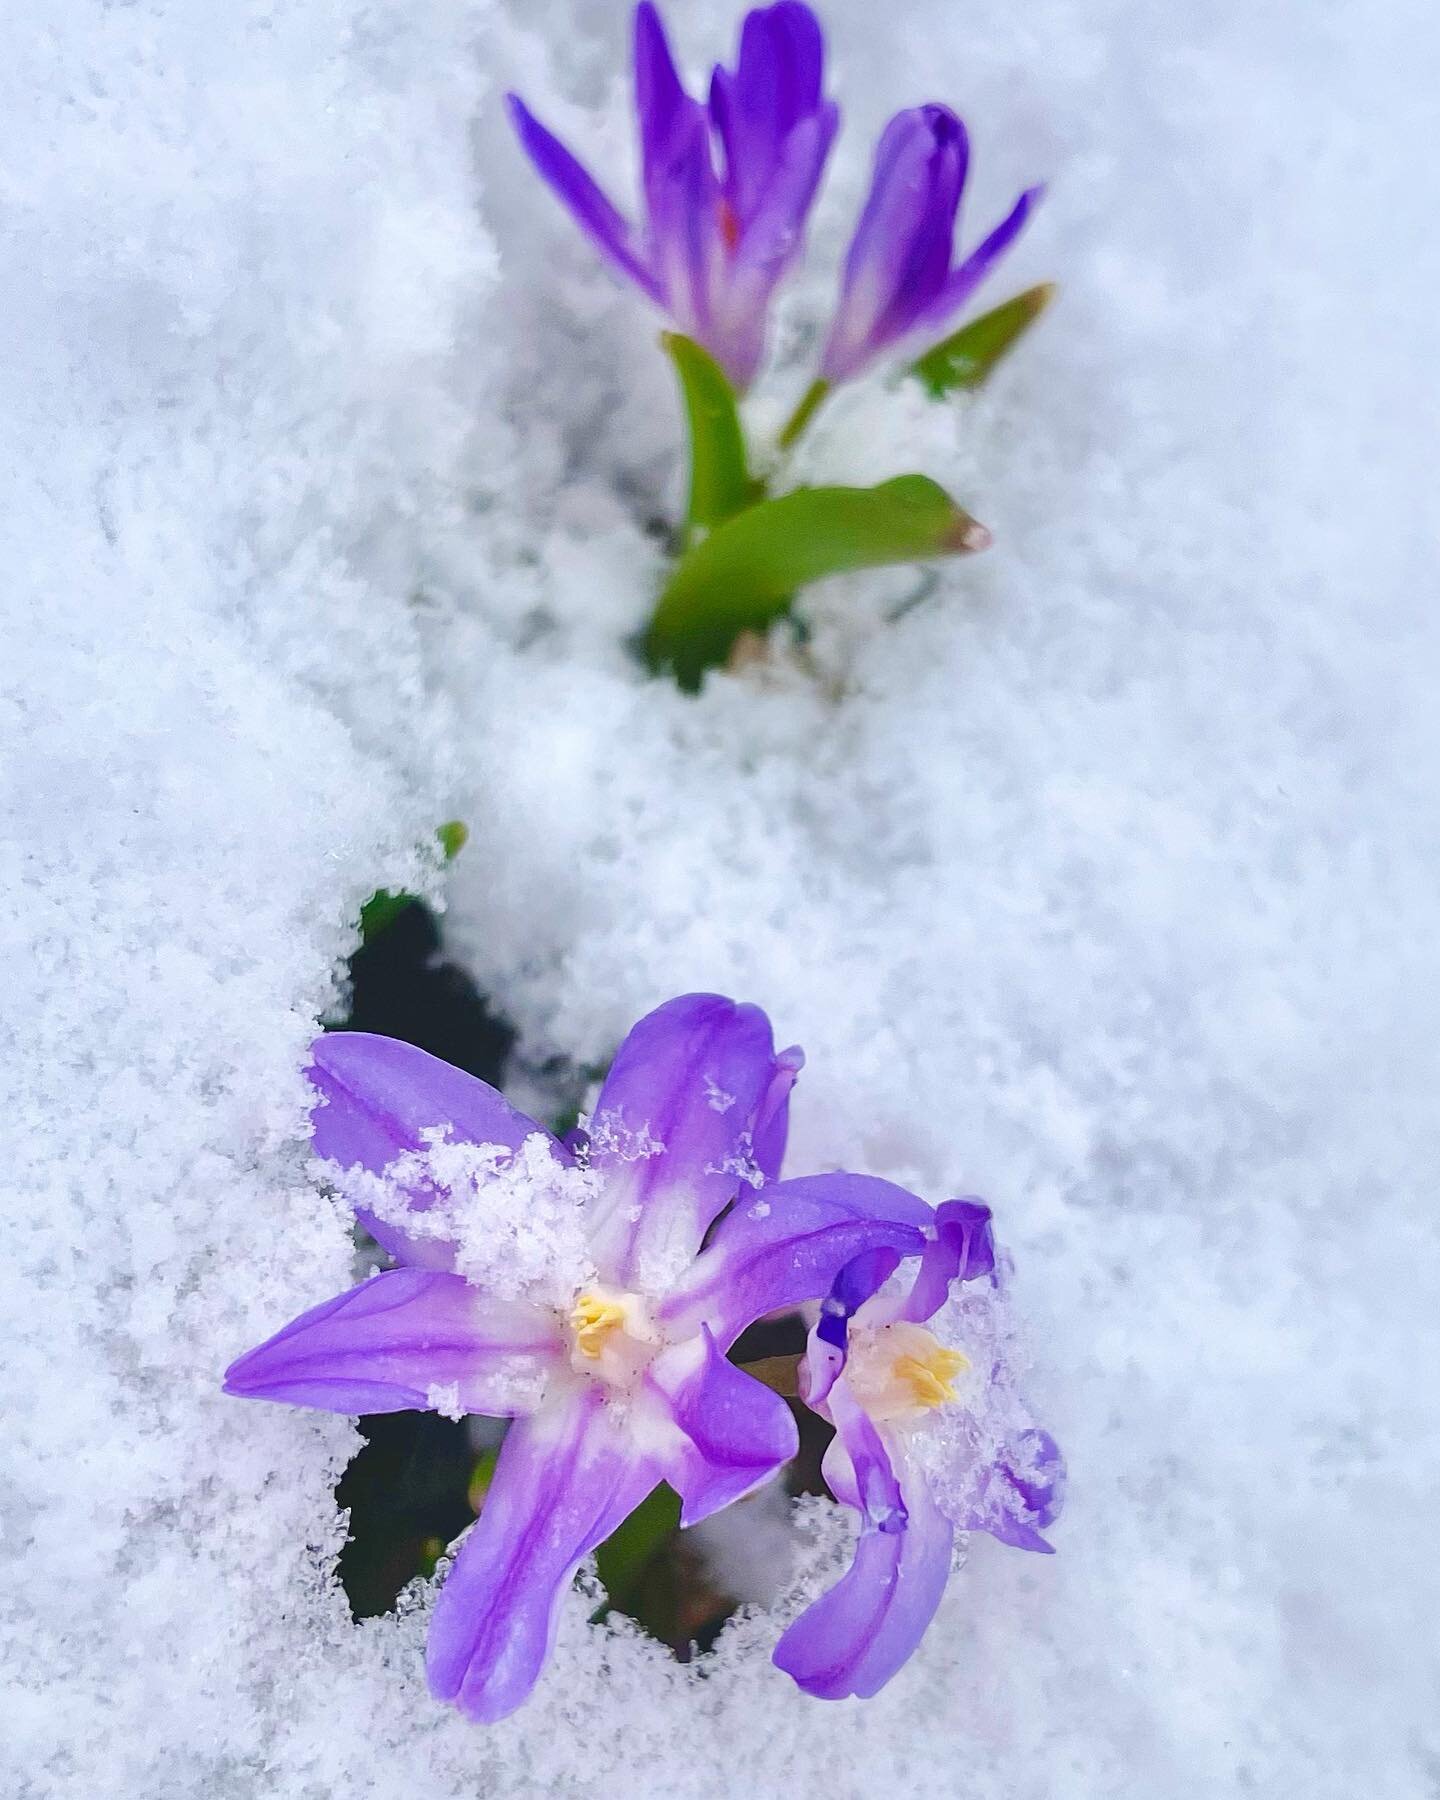 Chionodoxa forbesii &mdash; Glory of the Snow &mdash; lives up to its name! These teeny little flowers started blooming over the weekend, and today they are poking out of the snow. A welcome reminder that spring is actually coming despite the flurrie